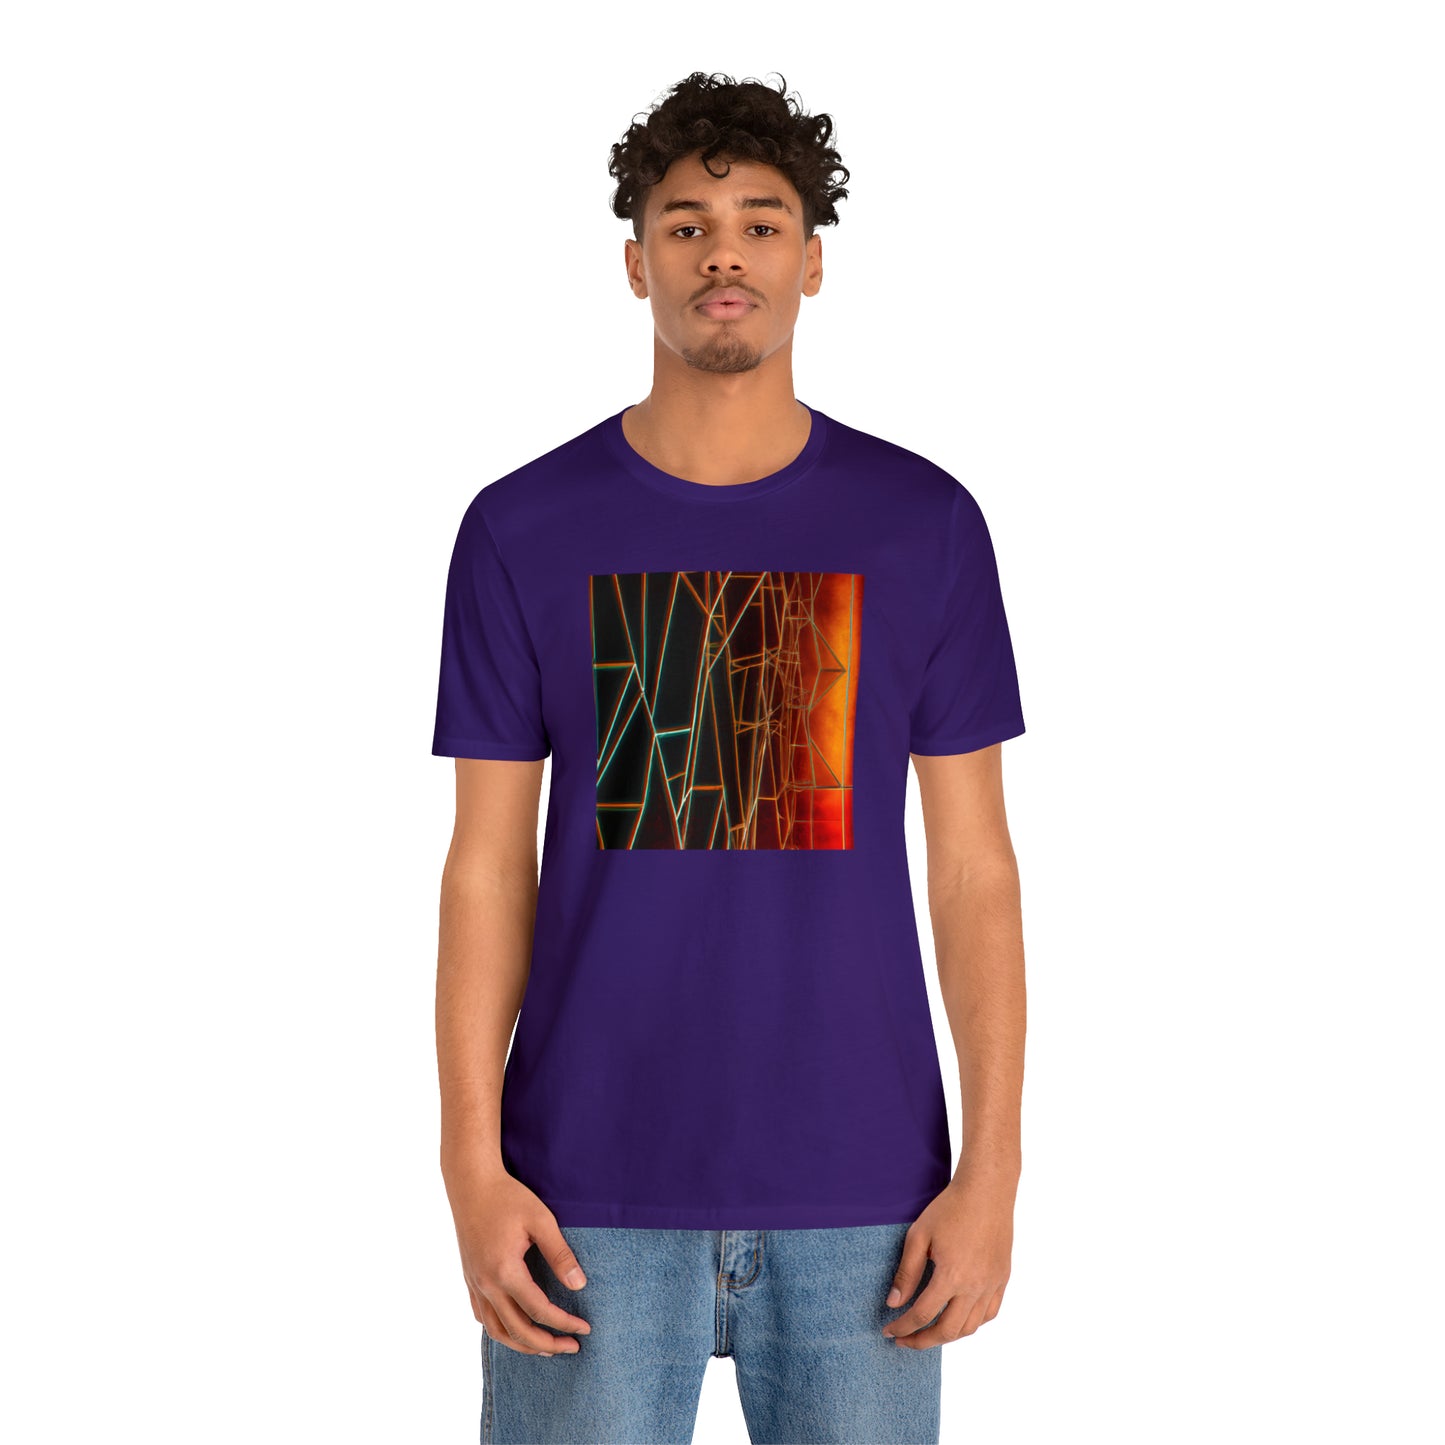 Alec Richardson - Tension Force, Abstractly - Tee